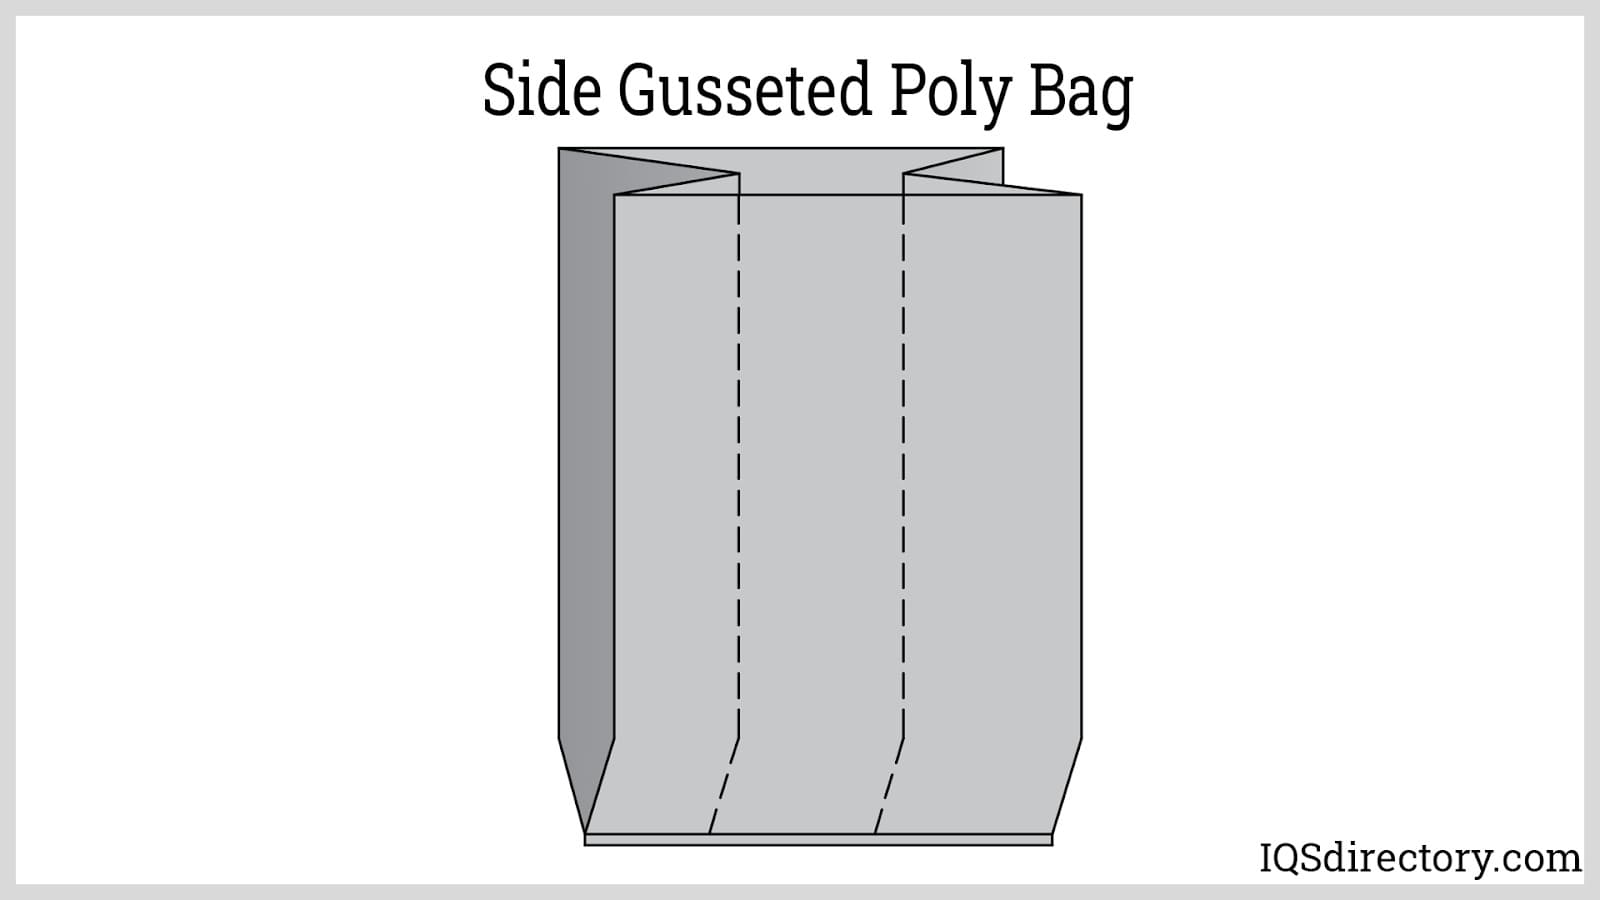 https://www.iqsdirectory.com/articles/plastic-bag/poly-bag/side-gusseted-poly-bag.jpg